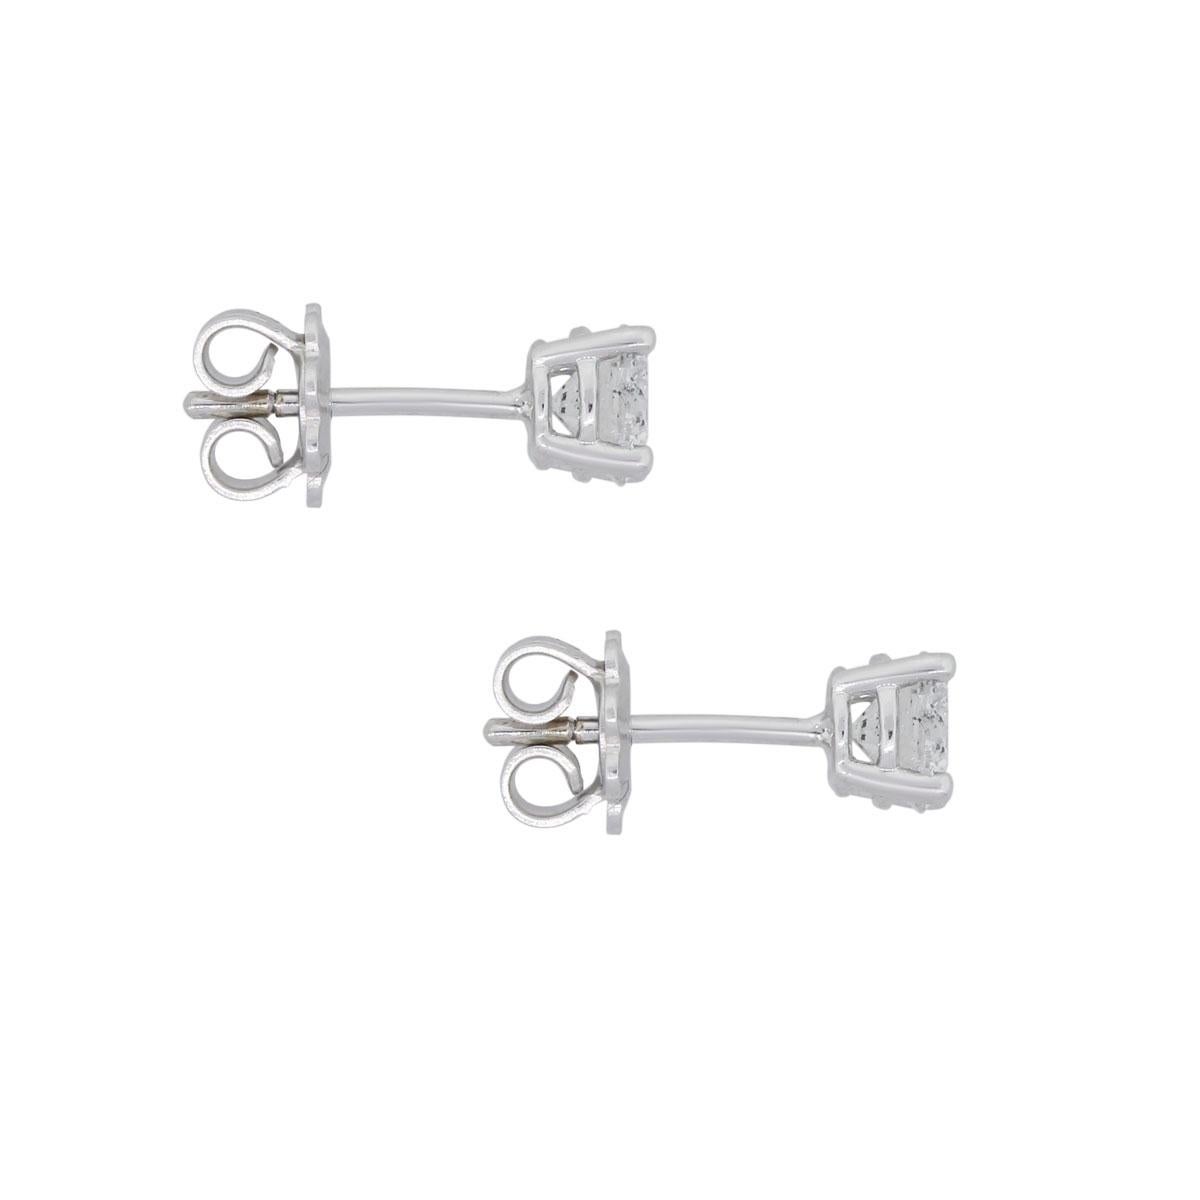 Material: 14k white gold
Diamond Details: Approximately 1.53ctw of round brilliant diamonds. Diamonds are F/G in color, SI3 in clarity
Measurements: 0.63″ x 0.21″ x 0.21″
Earrings Backs: Post friction
Total Weight: 2.1g (1.3dwt)
Additional Details: